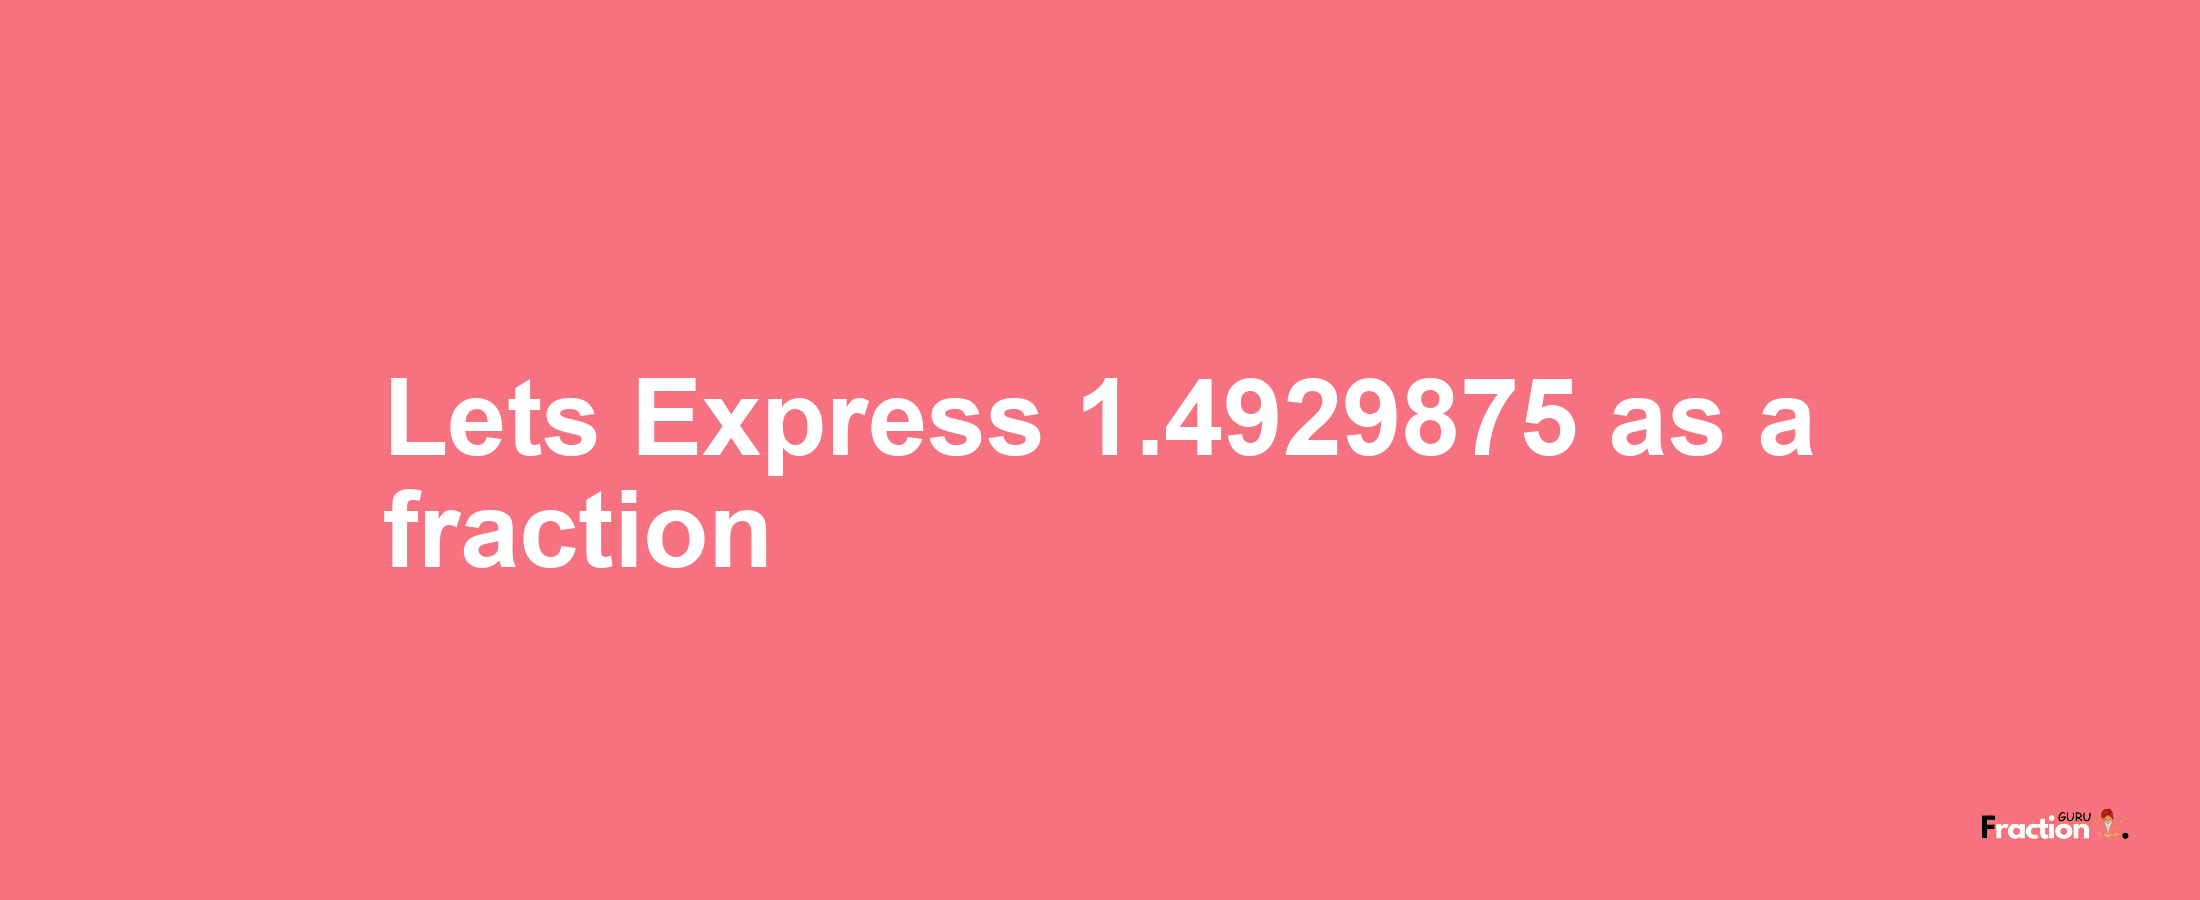 Lets Express 1.4929875 as afraction